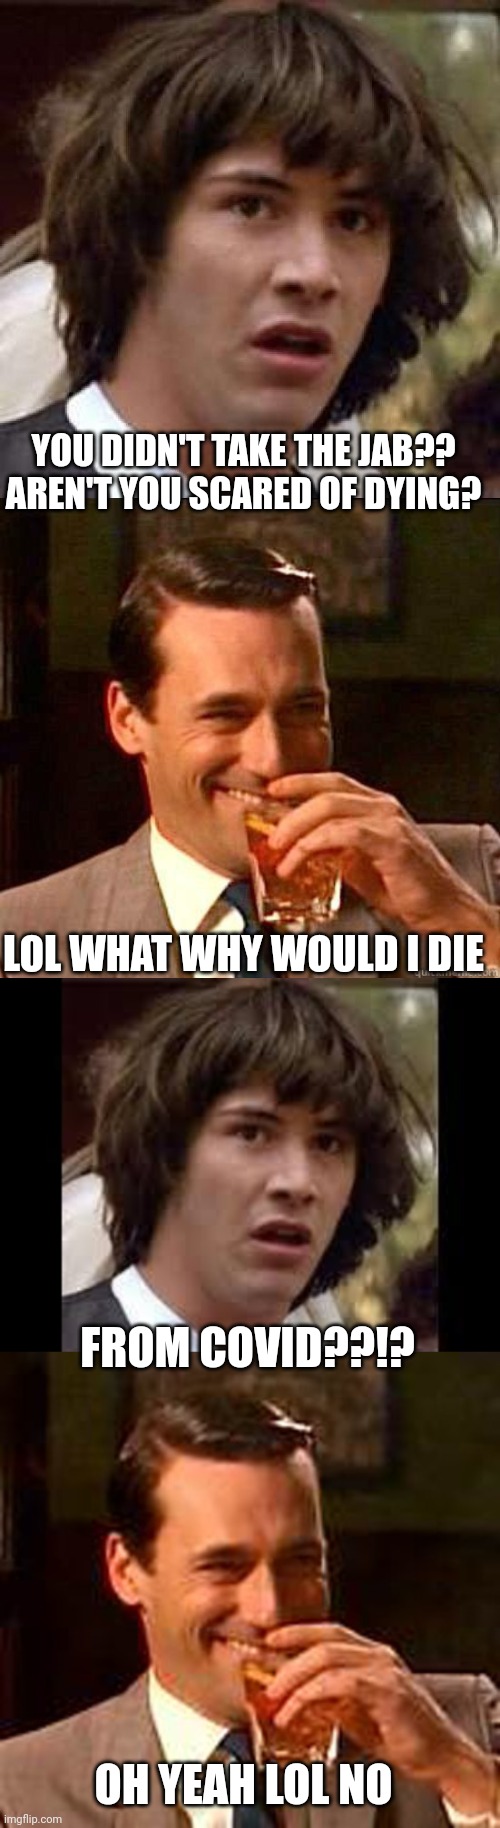 Lol idk | YOU DIDN'T TAKE THE JAB?? AREN'T YOU SCARED OF DYING? LOL WHAT WHY WOULD I DIE; FROM COVID??!? OH YEAH LOL NO | image tagged in memes,conspiracy keanu,laughing don draper,keanu reeves,covid-19,vaccines | made w/ Imgflip meme maker